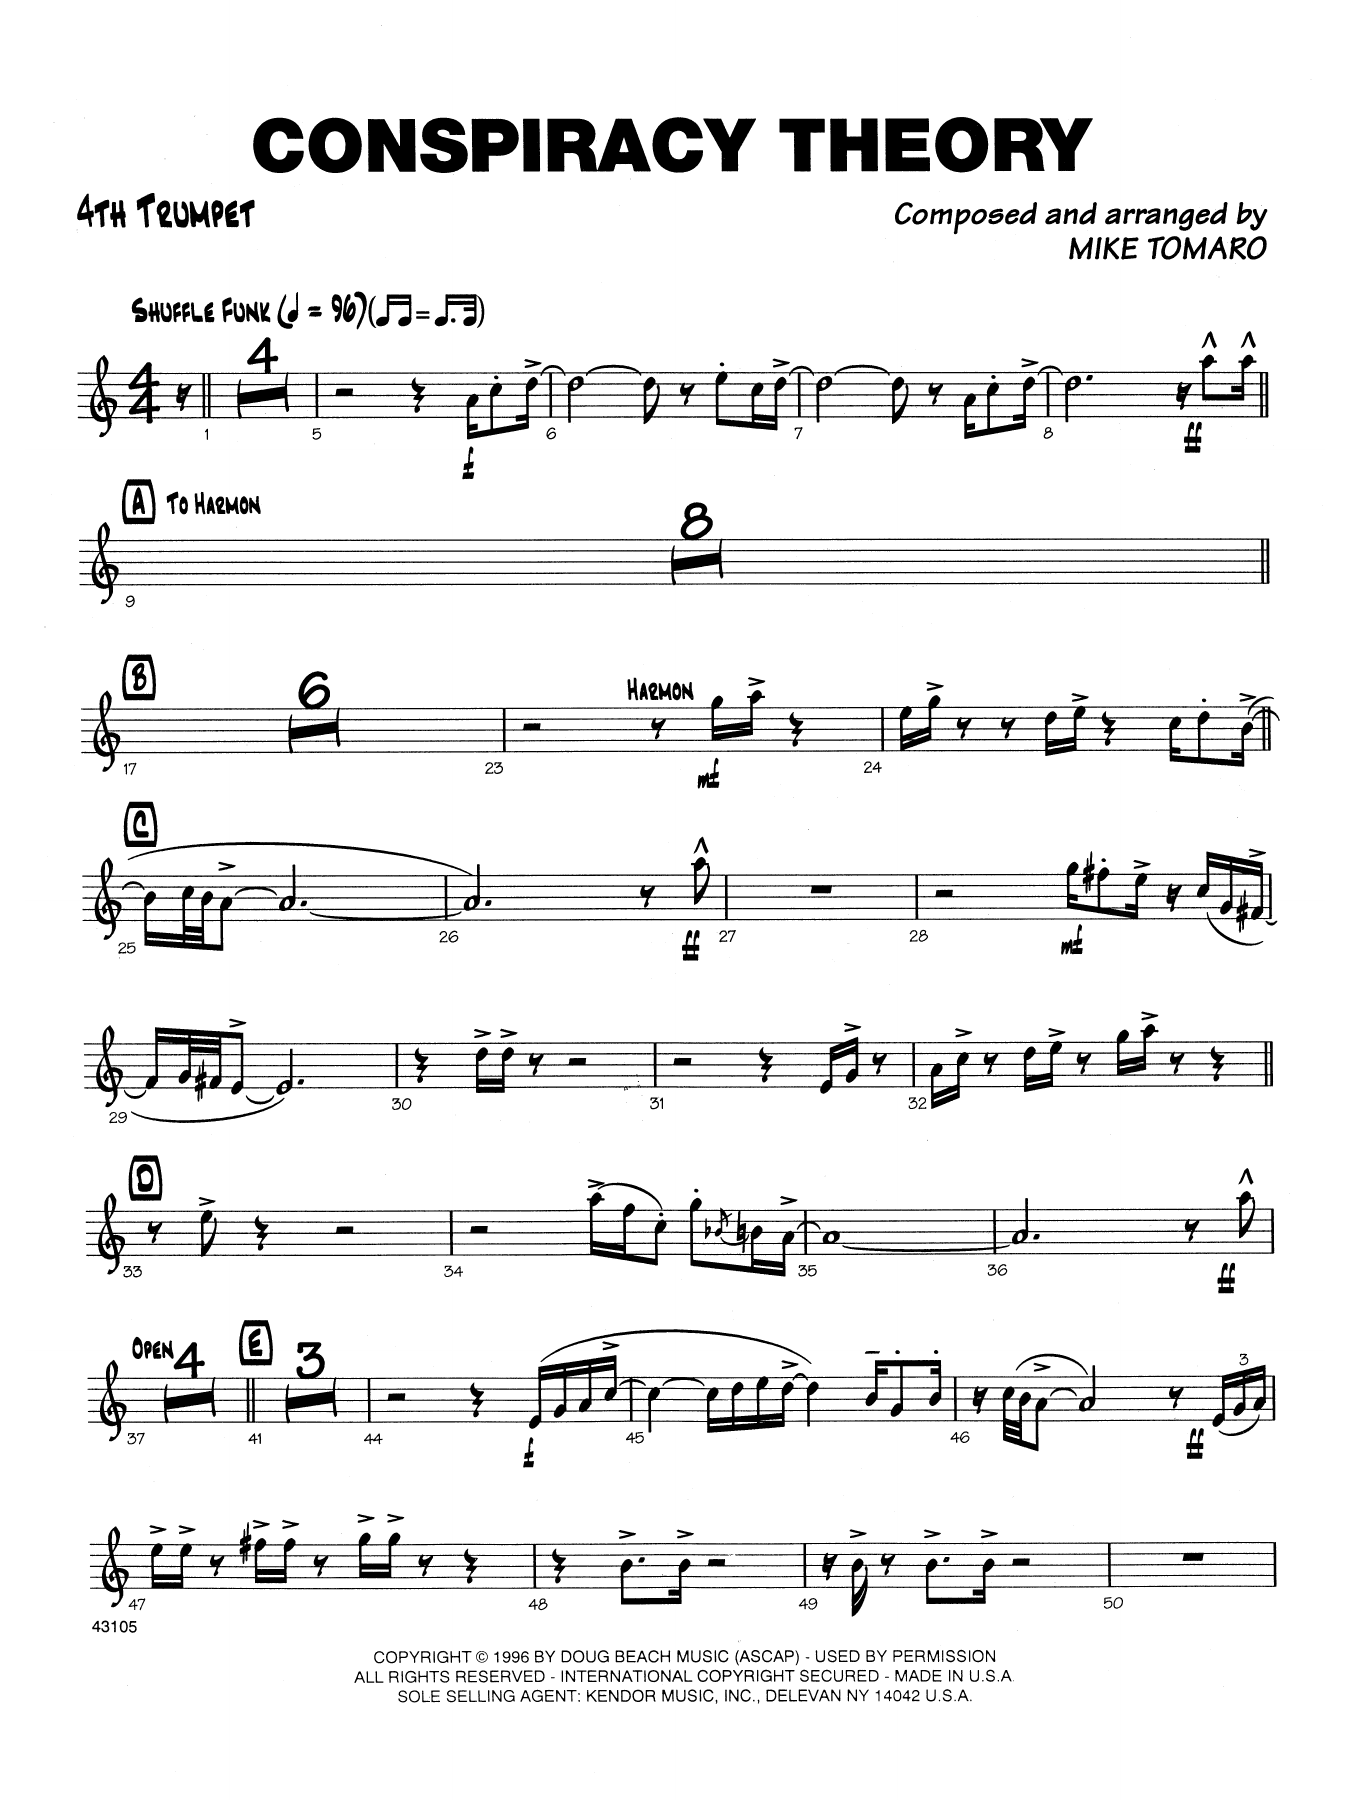 Download Mike Tomaro Conspiracy Theory - 4th Bb Trumpet Sheet Music